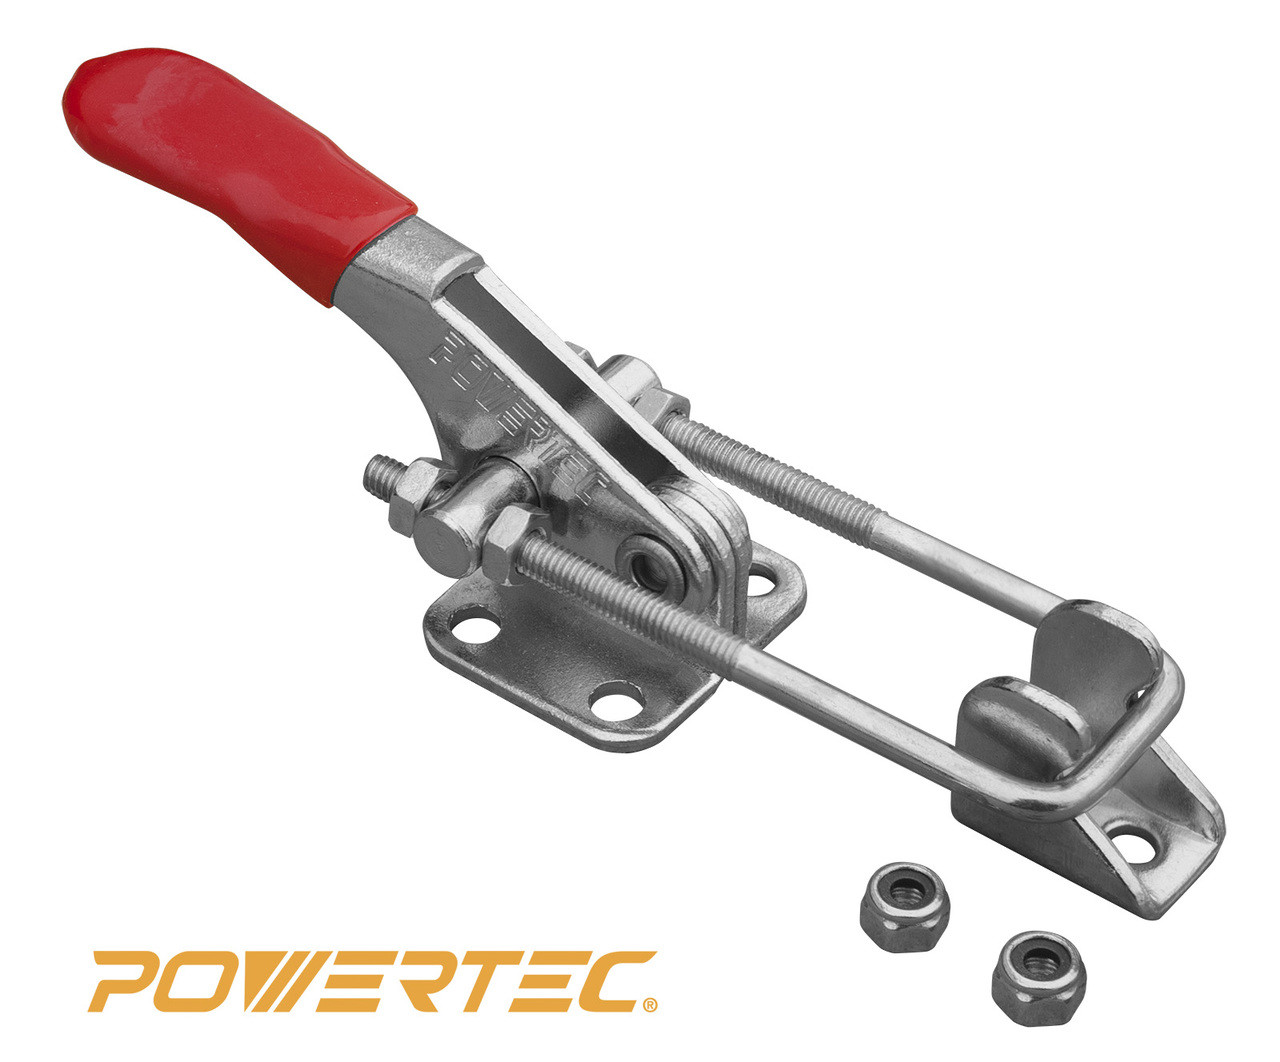 POWERTEC 20324 Latch Action Toggle Clamp W Threaded U Bolt and Red Vinyl Handle Grip 1980 lb Holding Capacity, 40344